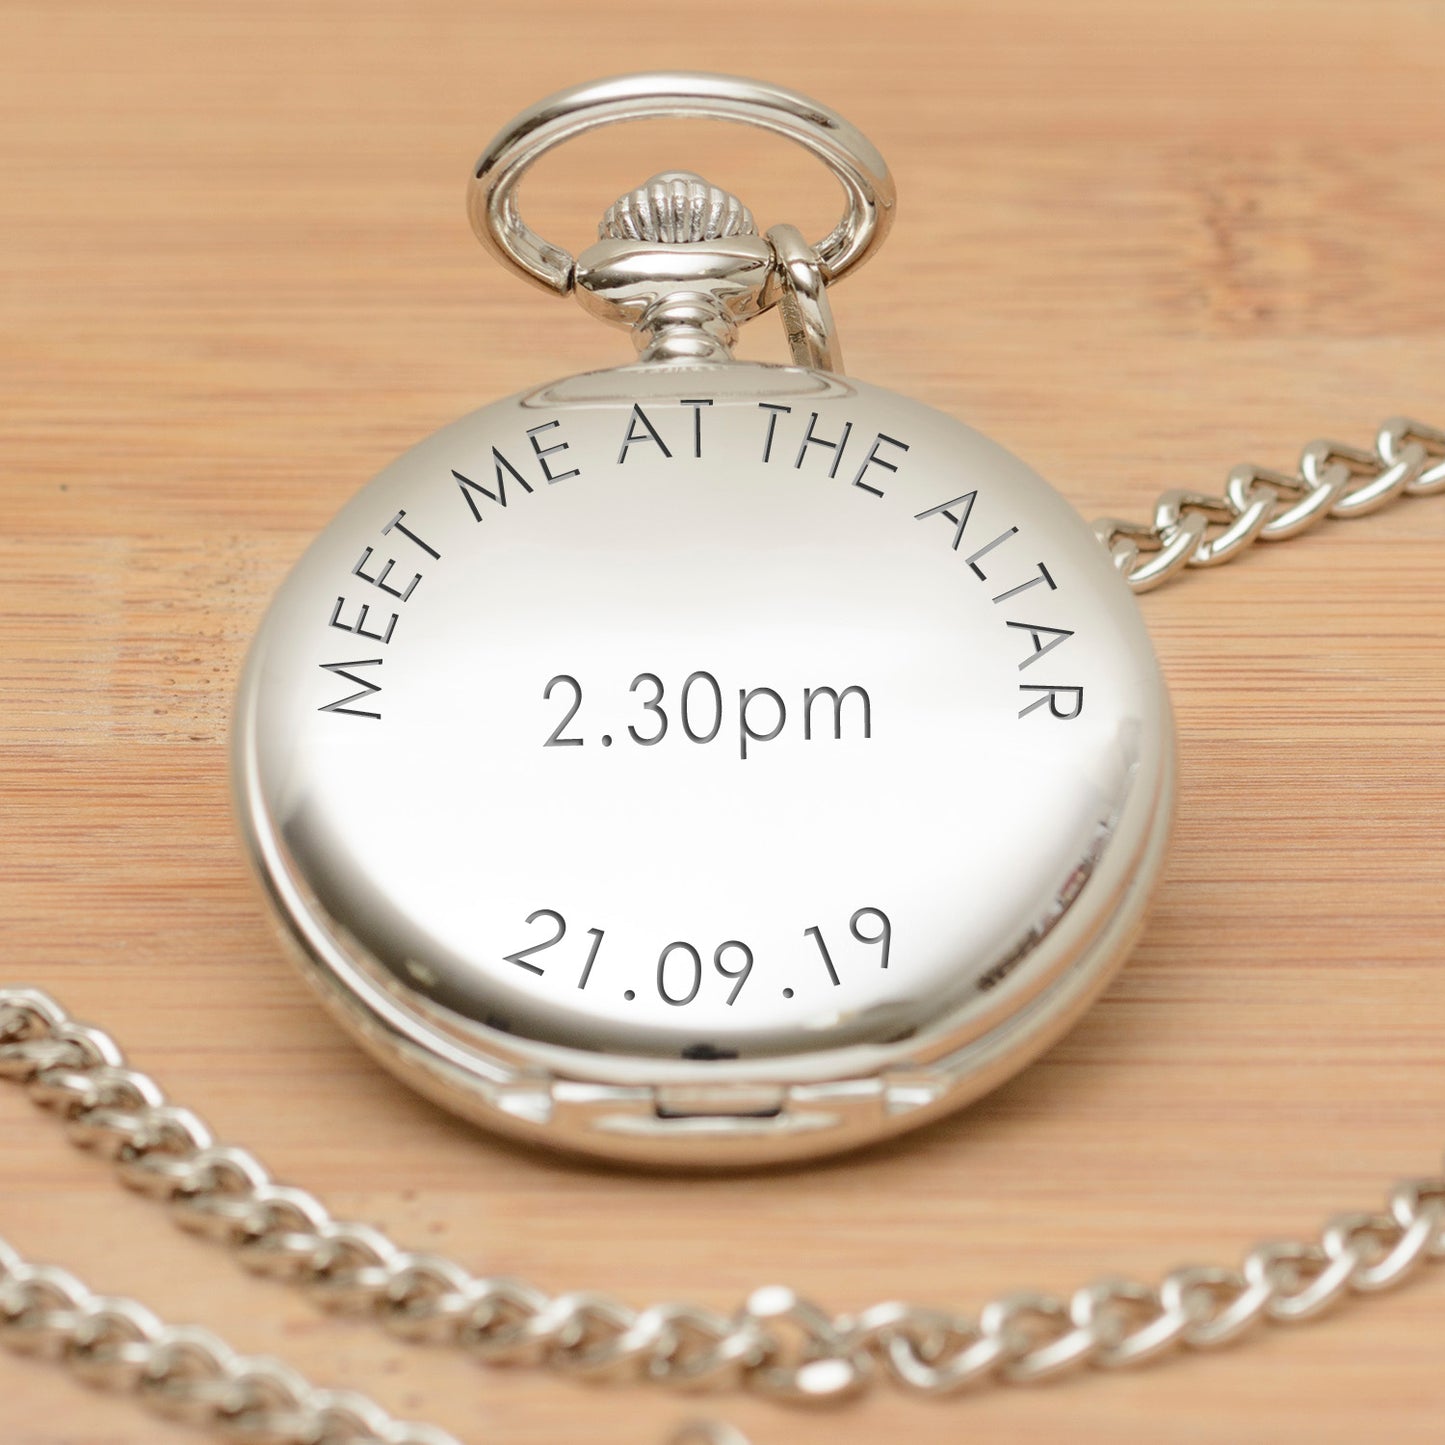 Engraved Pocket Watch For Groom - Meet Me At The Altar